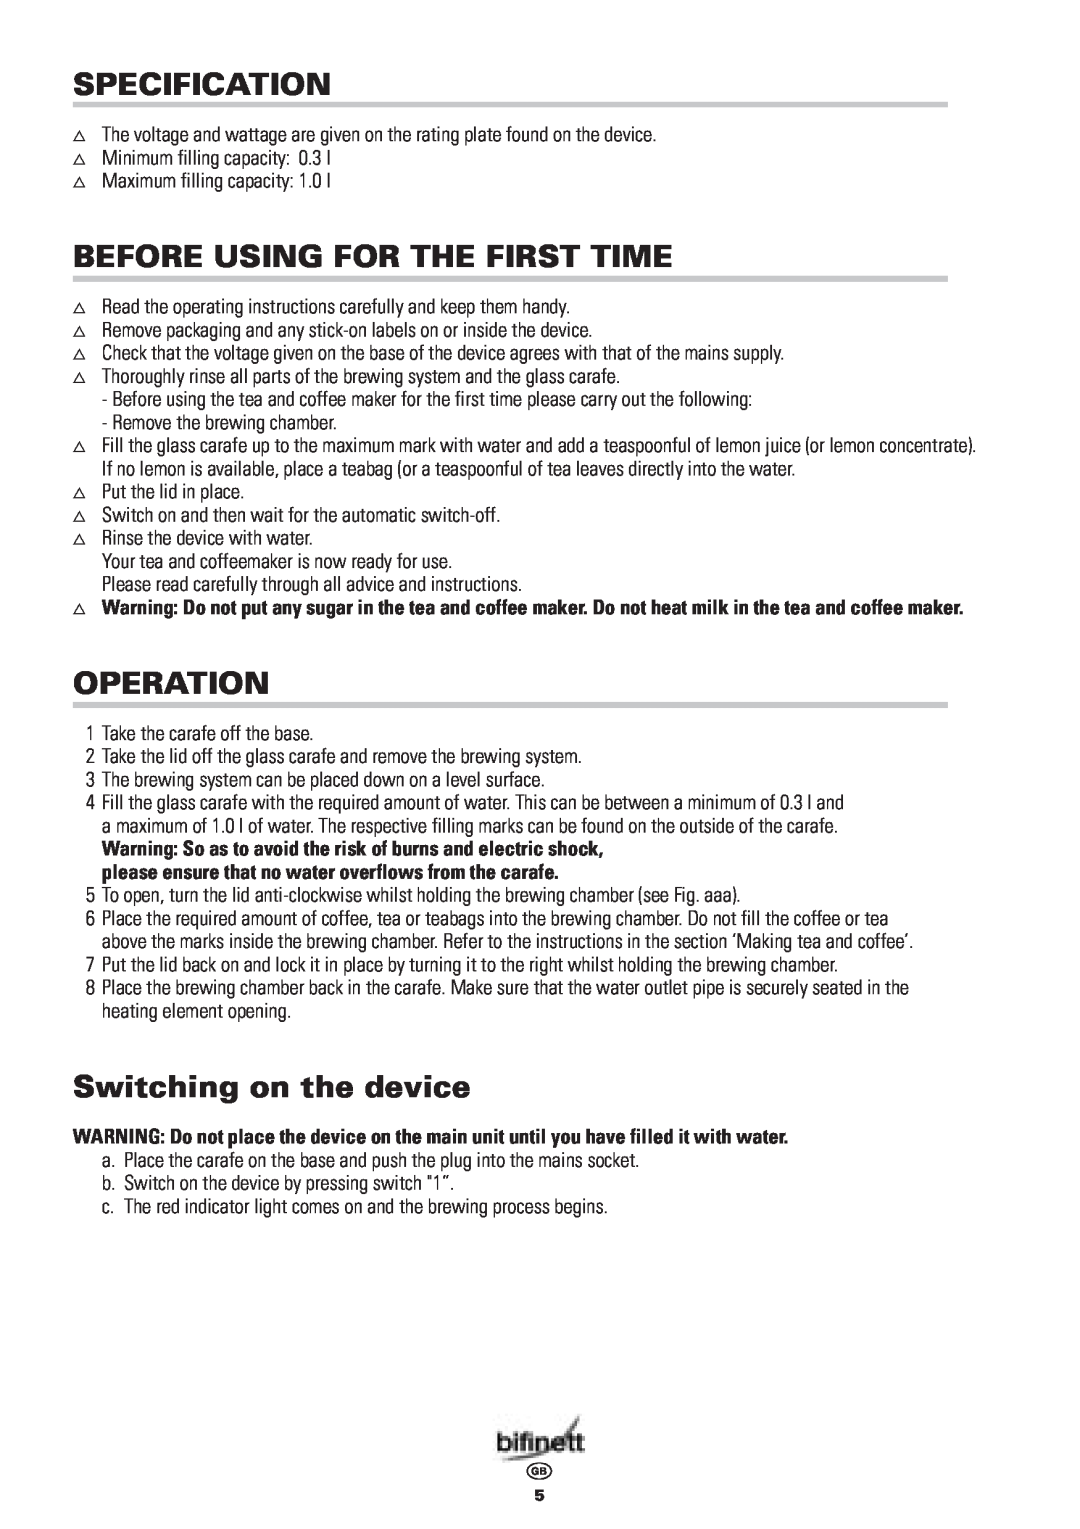 Bifinett KH 600 manual Specification, Before Using For The First Time, Operation, Switching on the device 